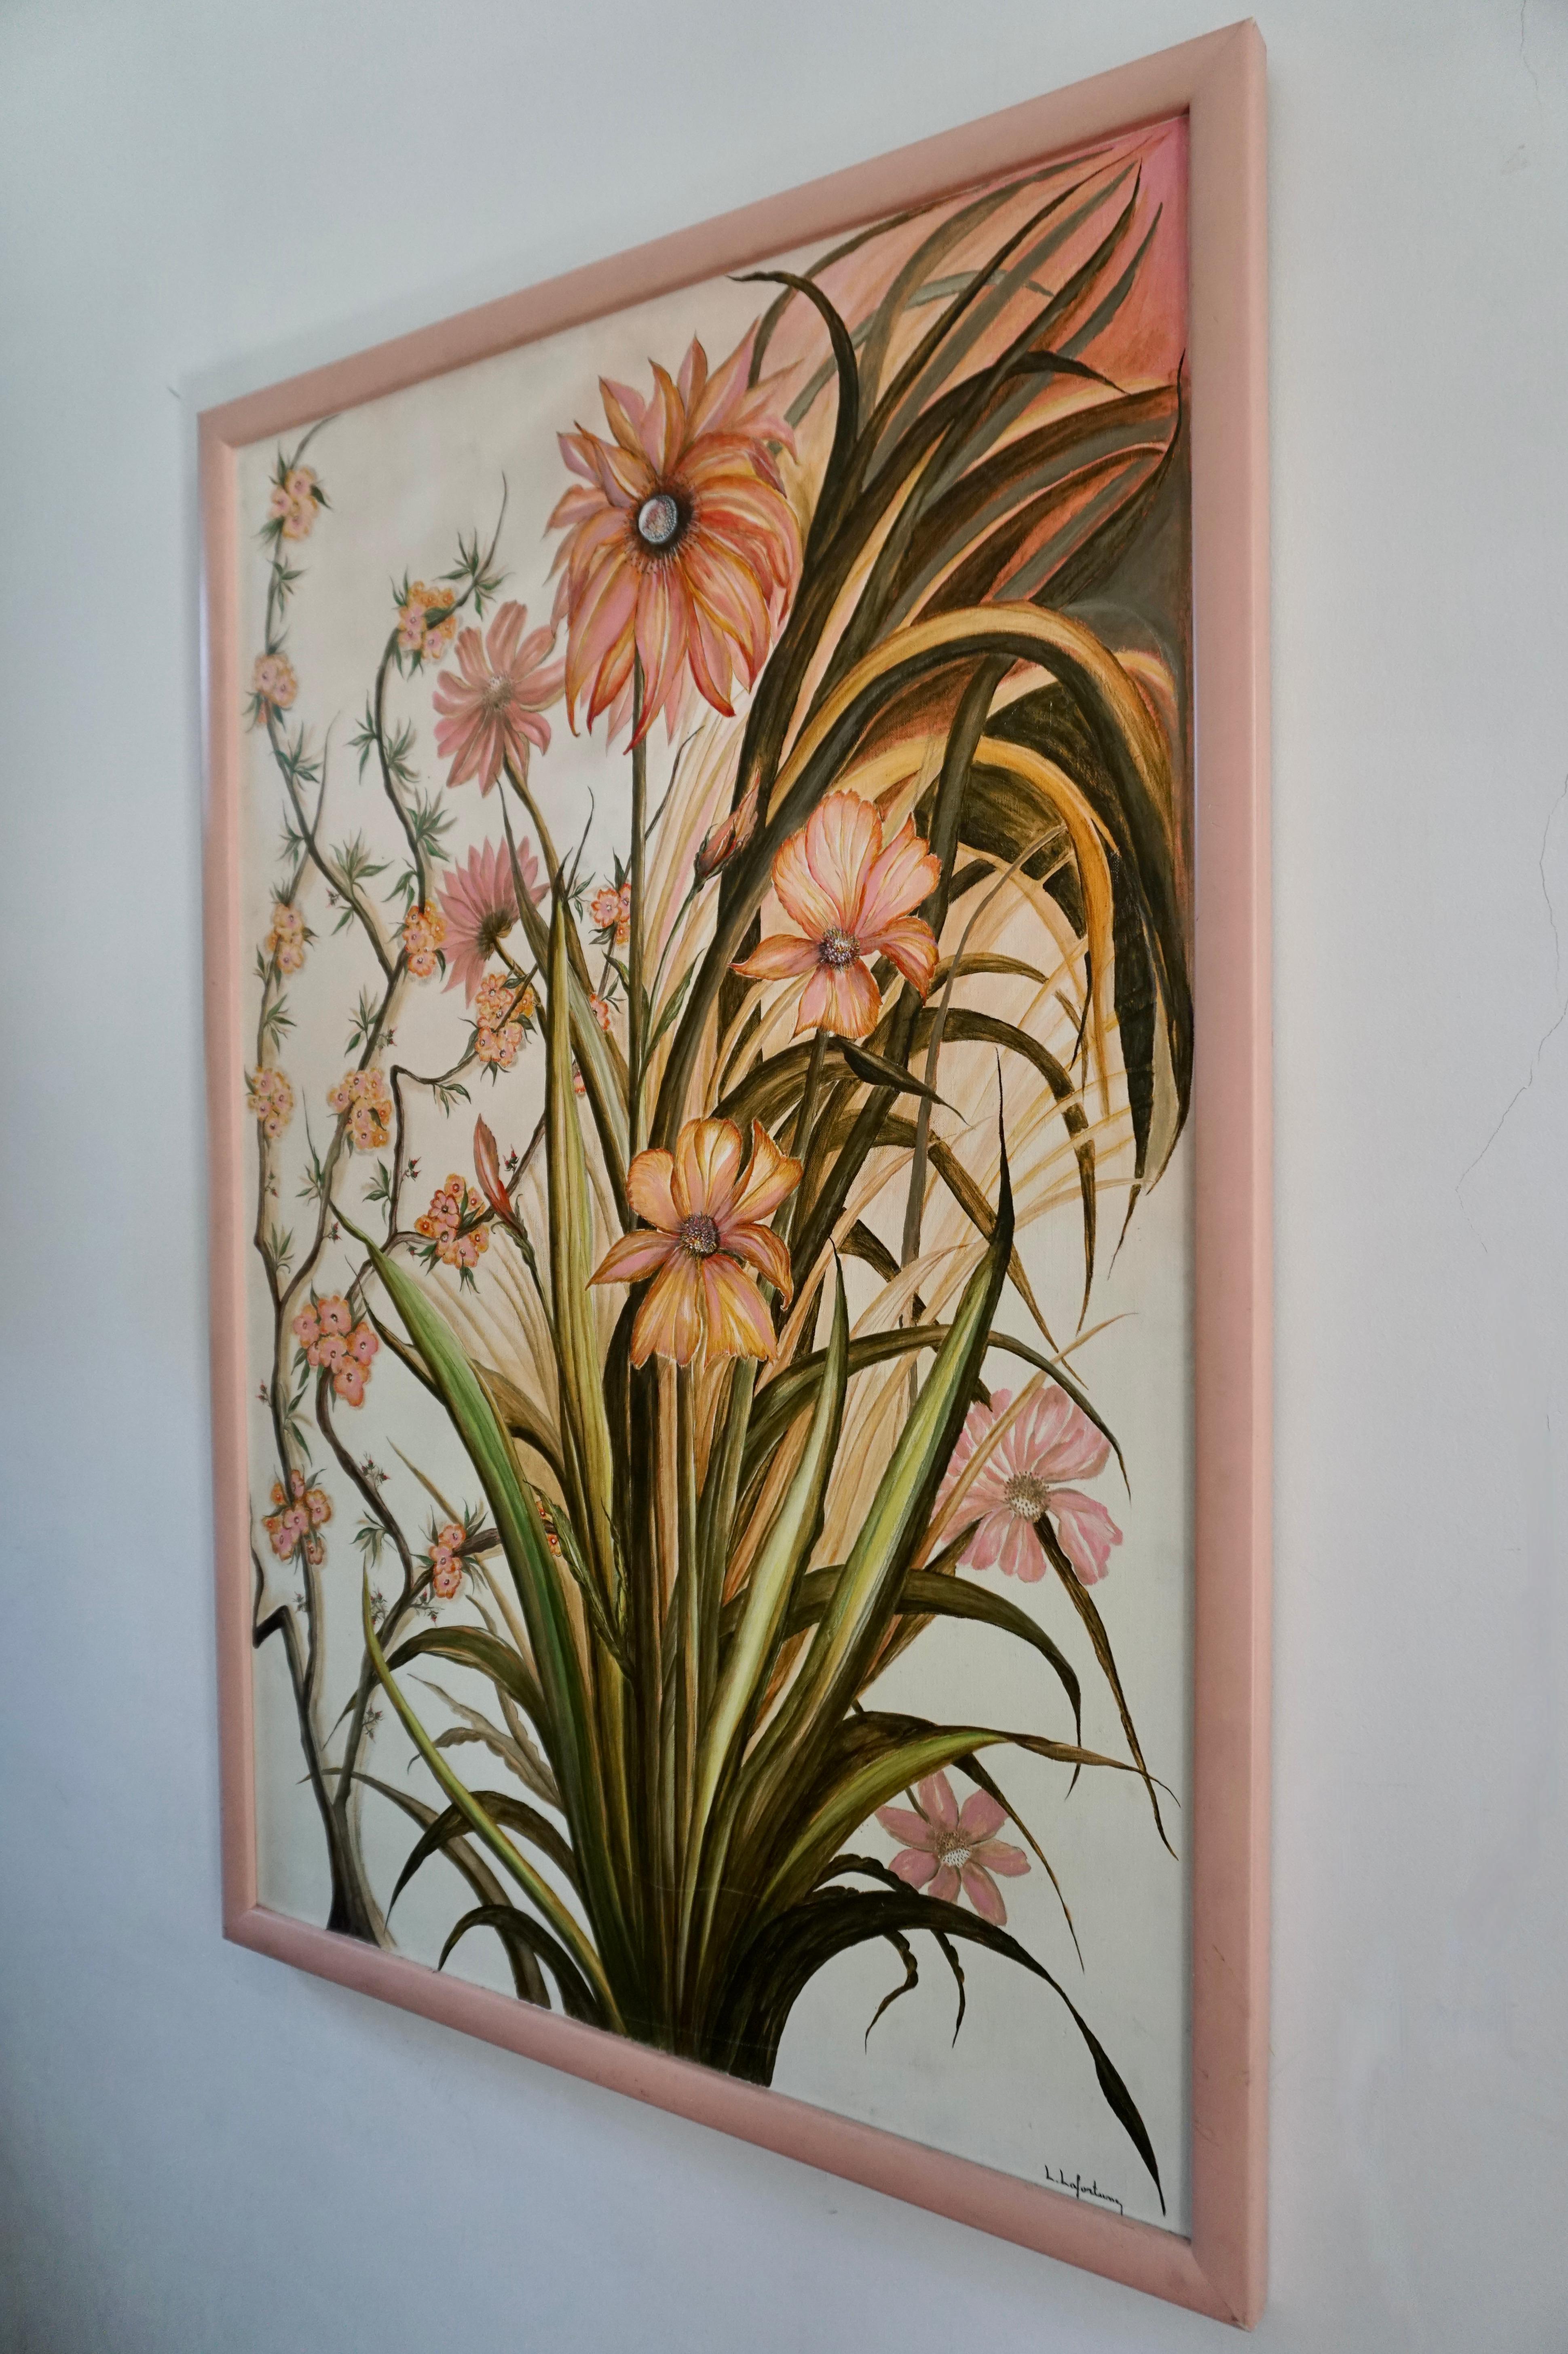 A beautiful realist painting of pink flowers by Artist, L Lafortune. 

Medium: Oil on canvas.